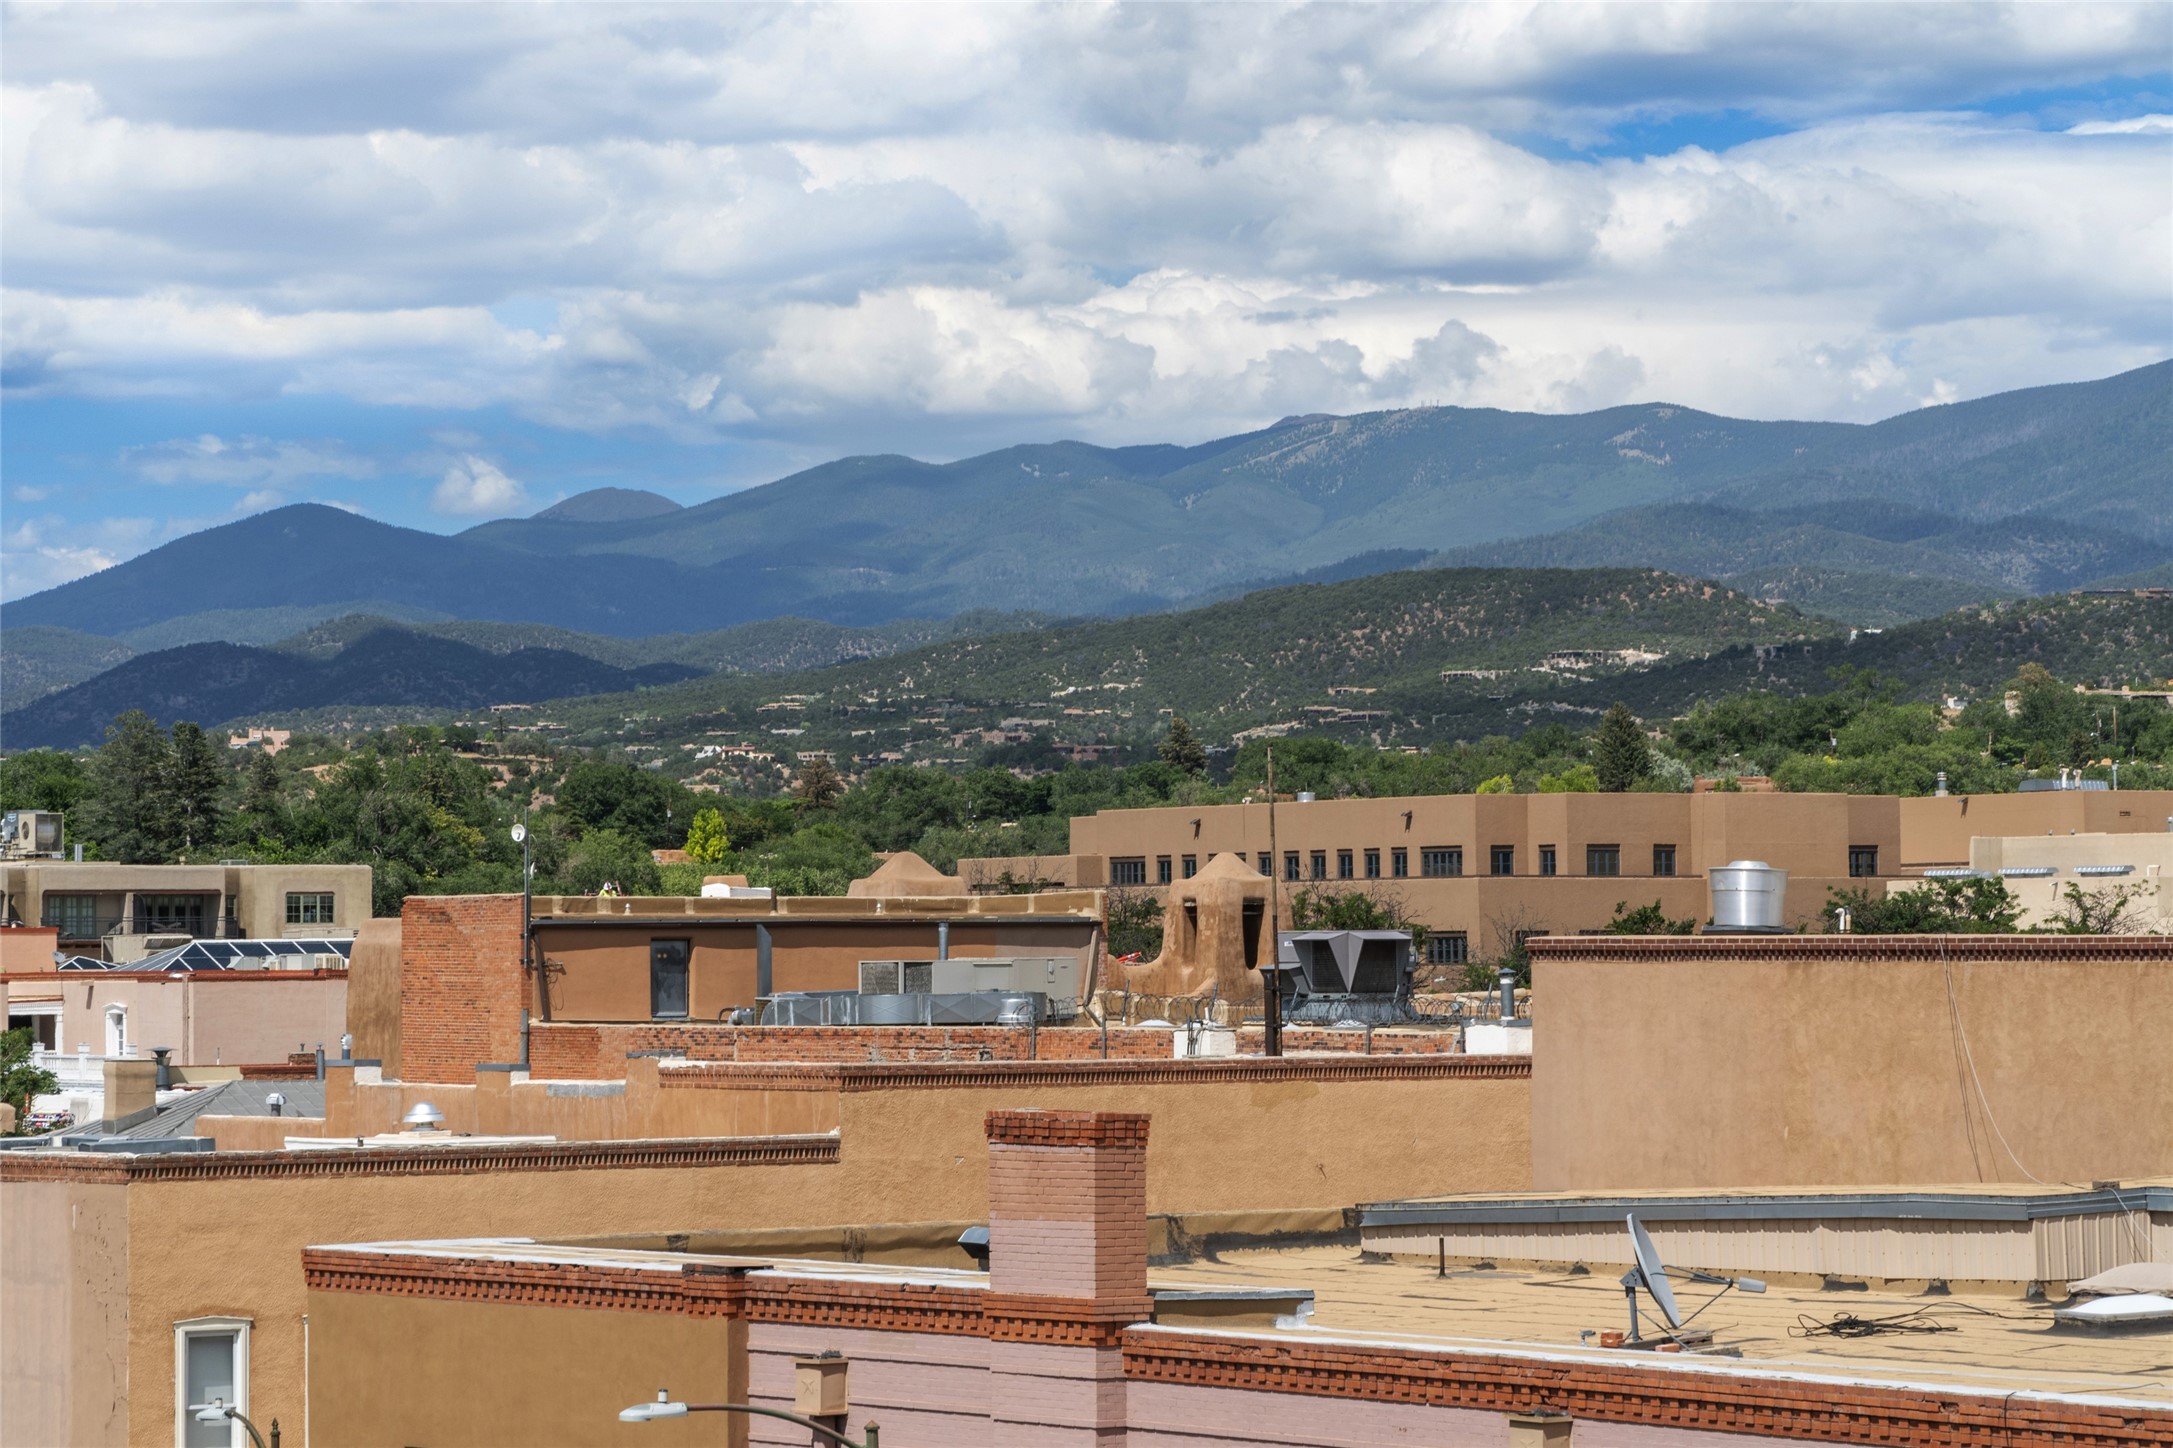 Mountain Views from the rooftop